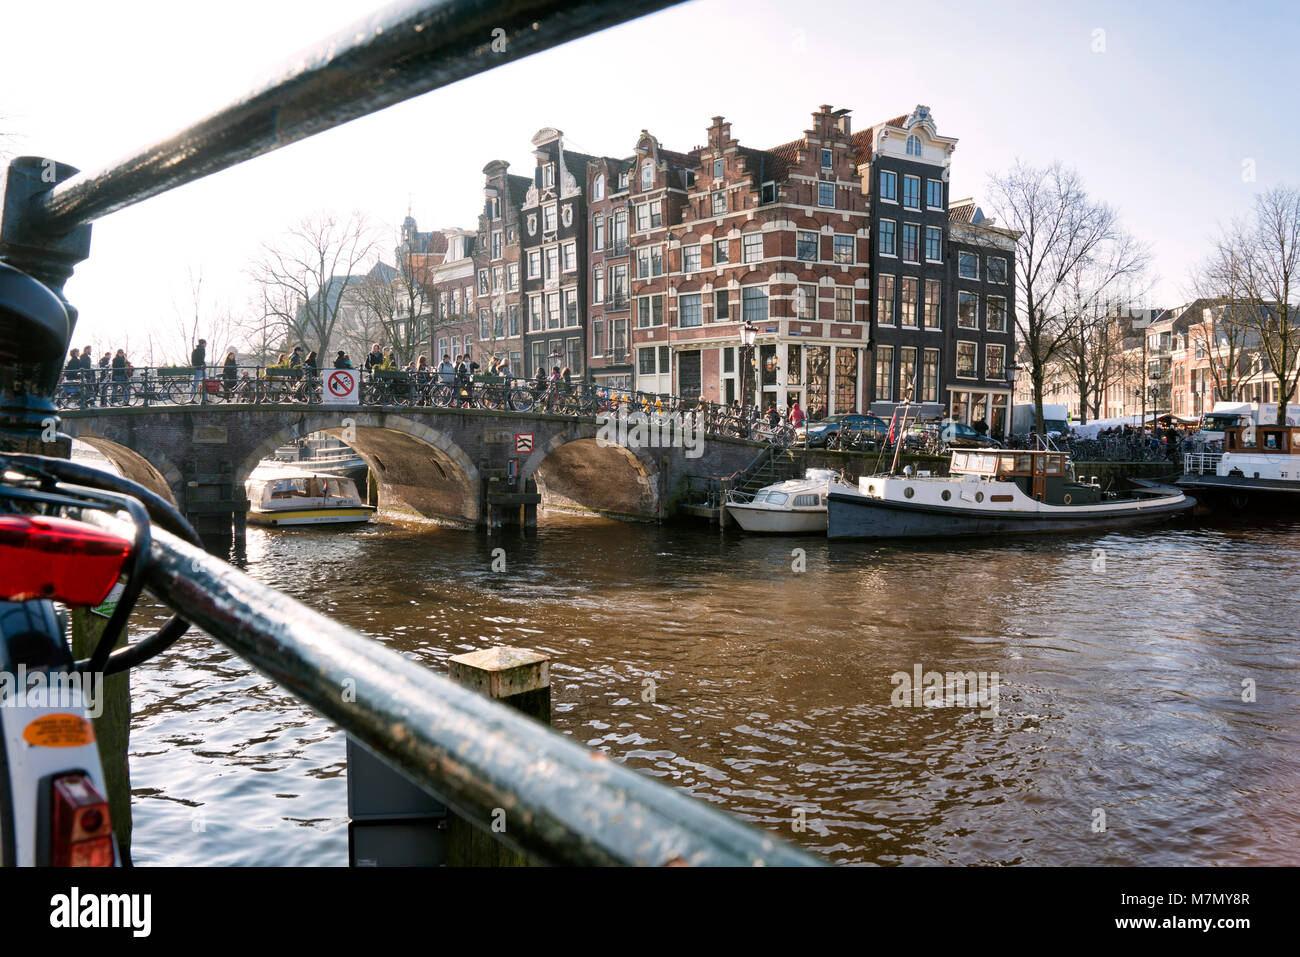 Canal pendente case sul canale Prinsengracht / Brouwersgracht, Amsterdam, Paesi Bassi Foto Stock